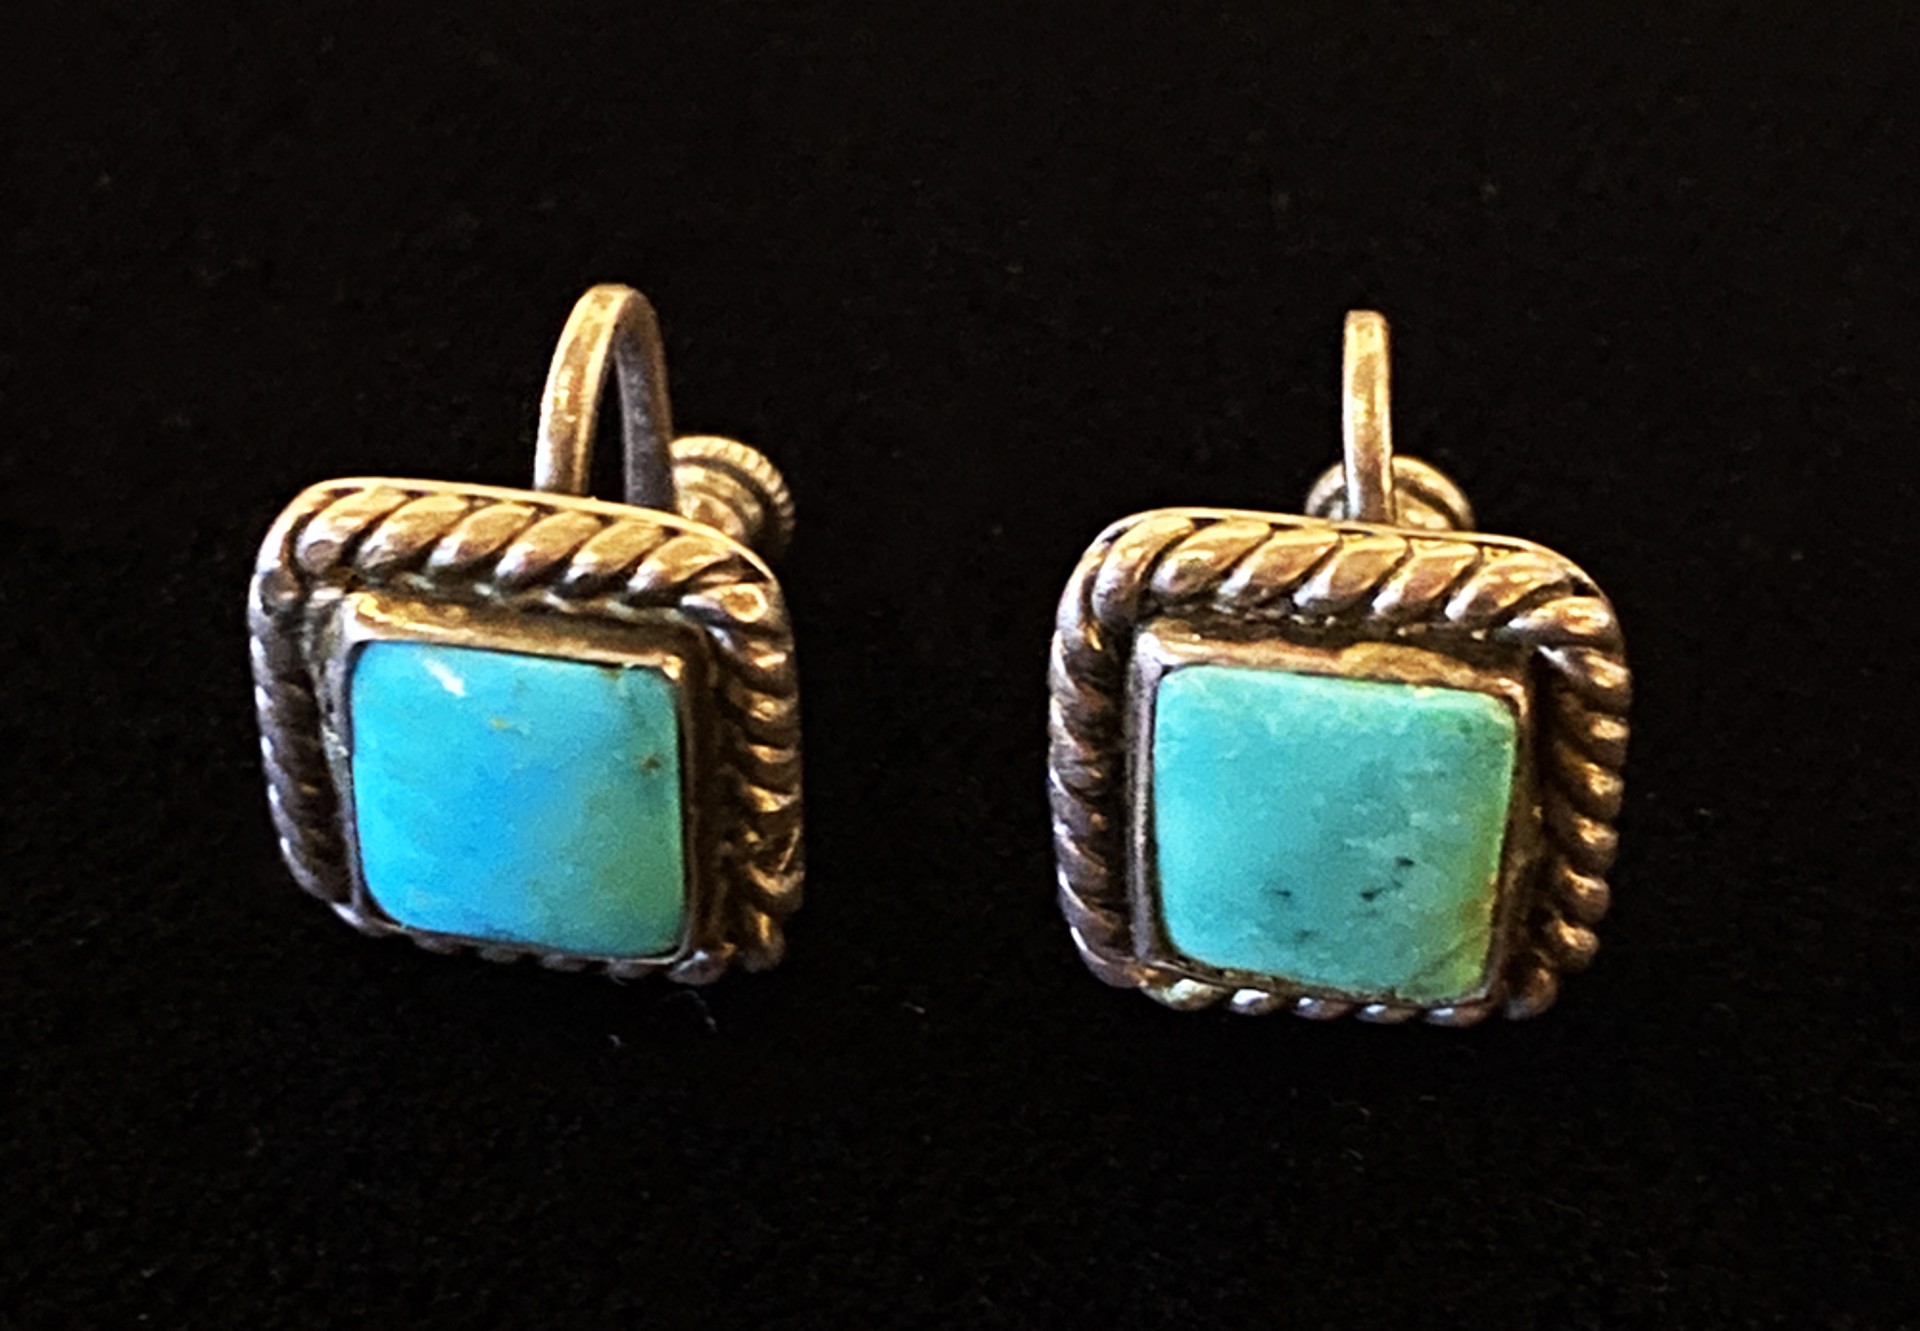 Turquoise Square Screw on earrings by Artist Unknown